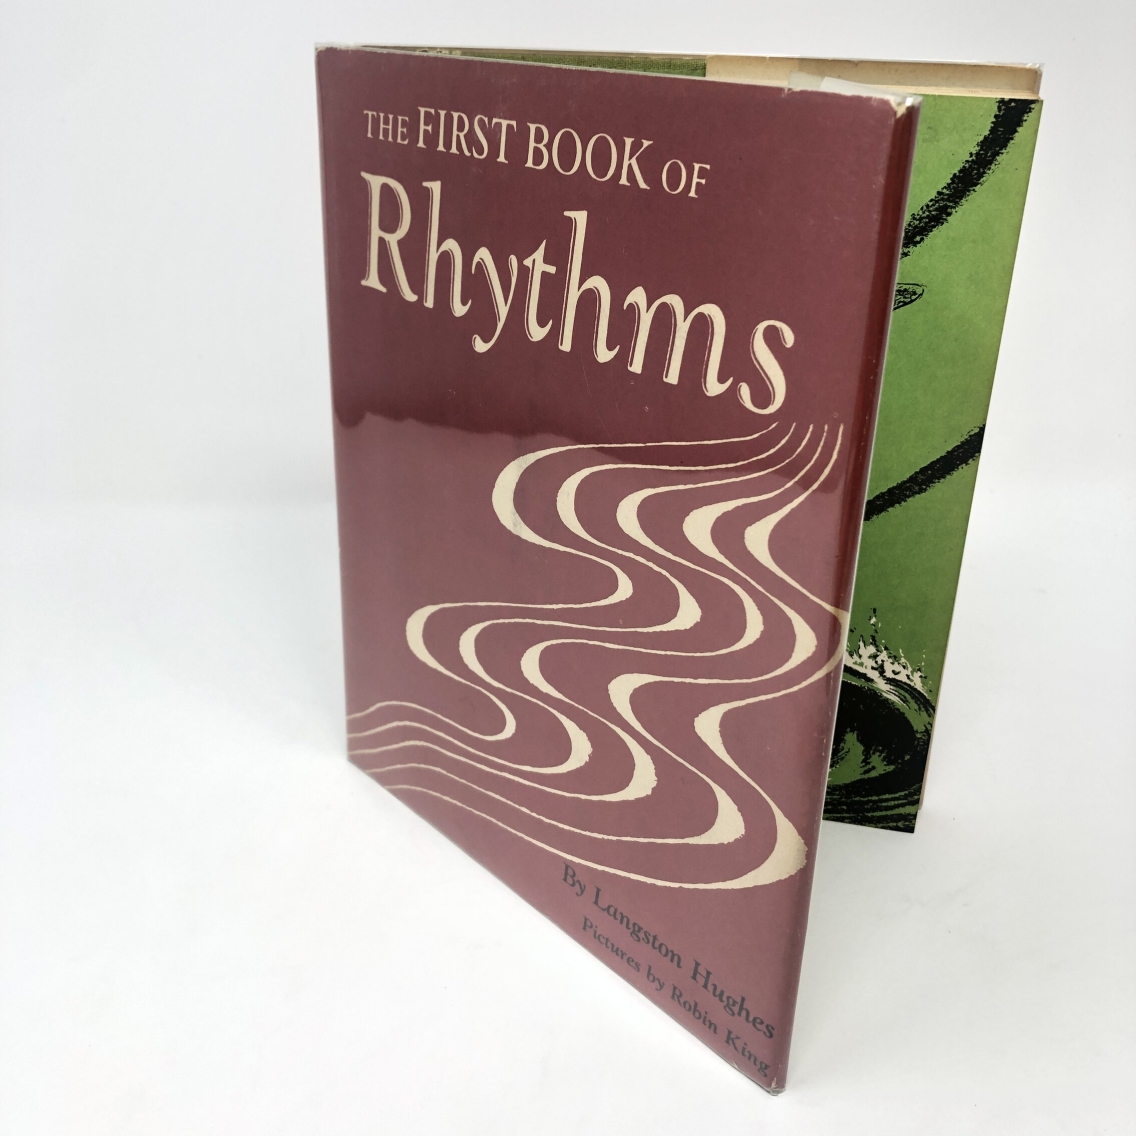 Photograph of the cover of The First Book of Rhythms by Langston Hughes. The cover is maroon.